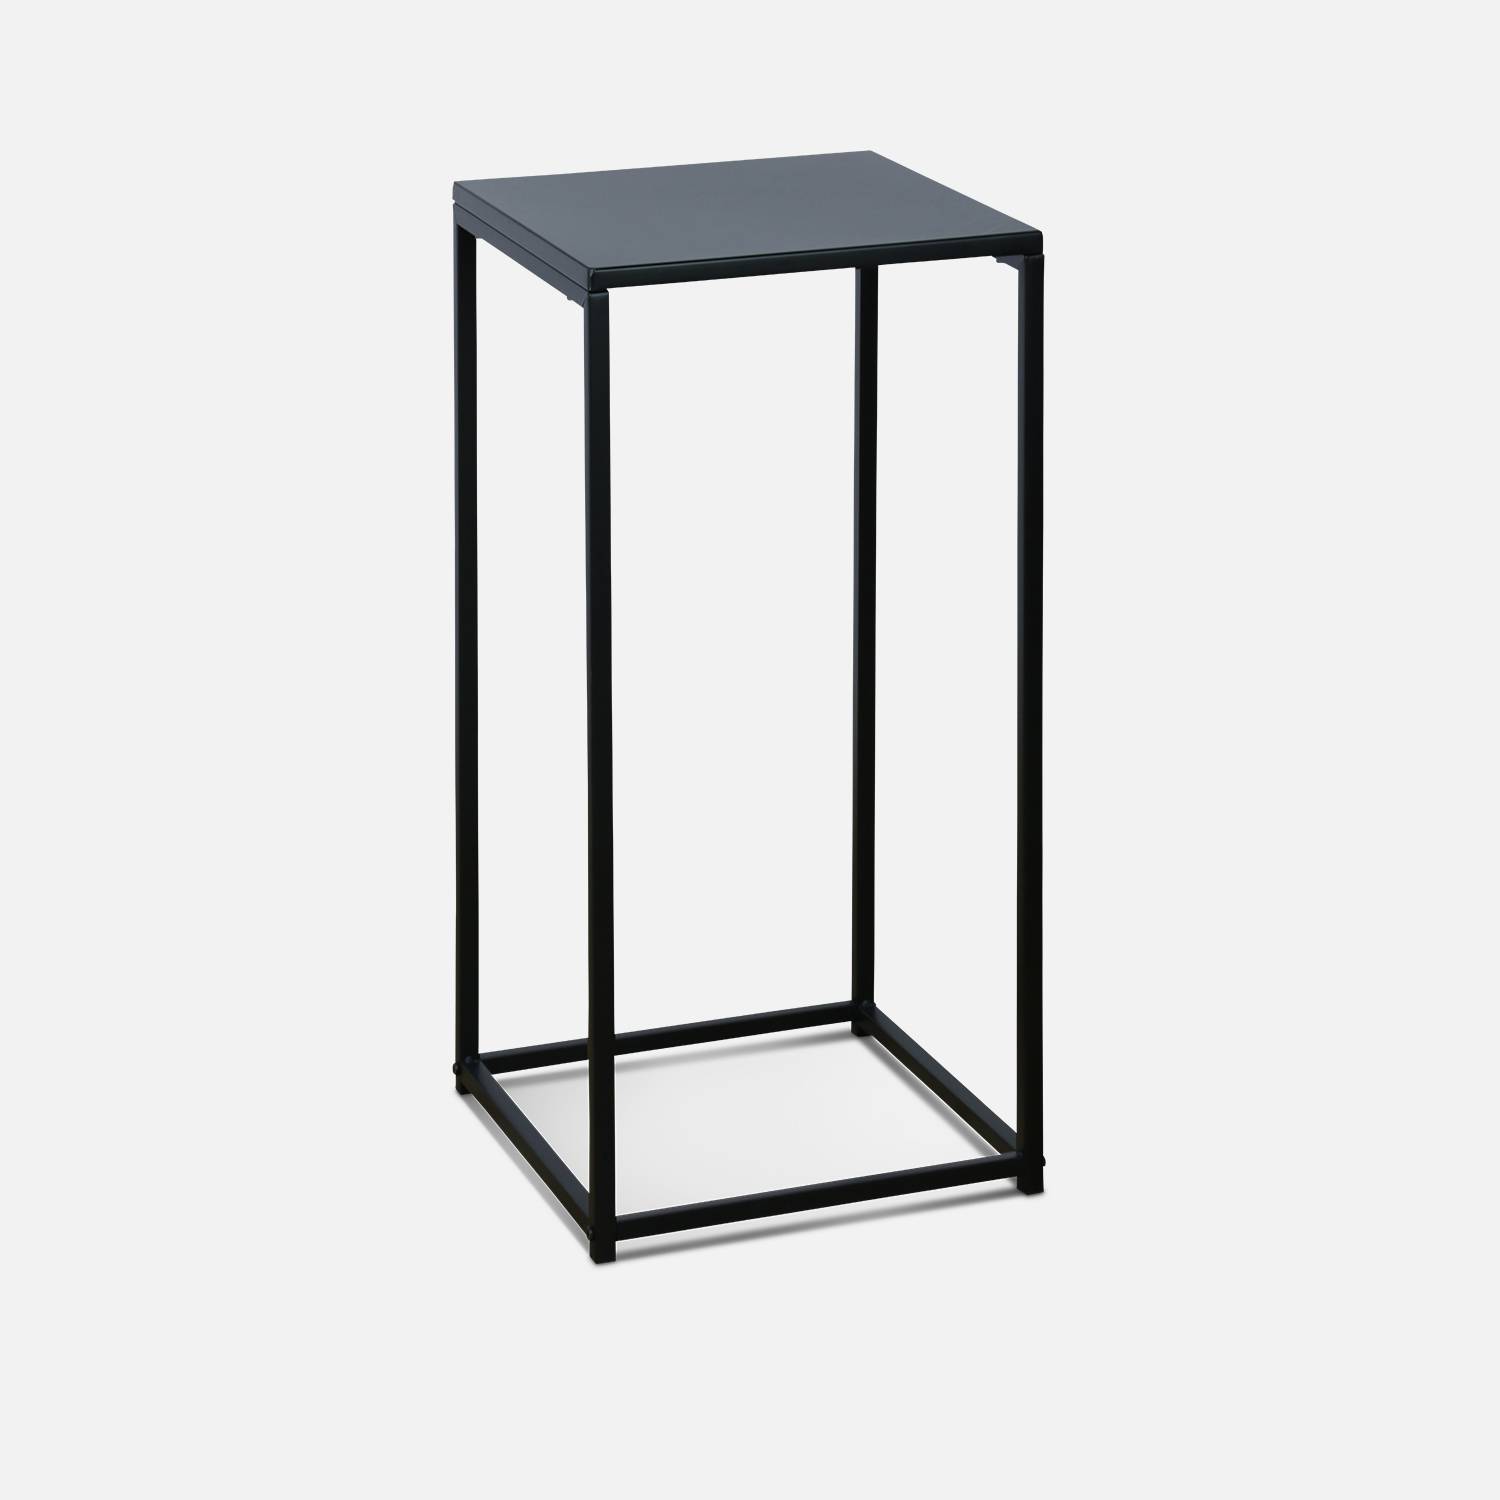 Set of 2 side tables/ end of sofa , Industrielle, Black,sweeek,Photo4